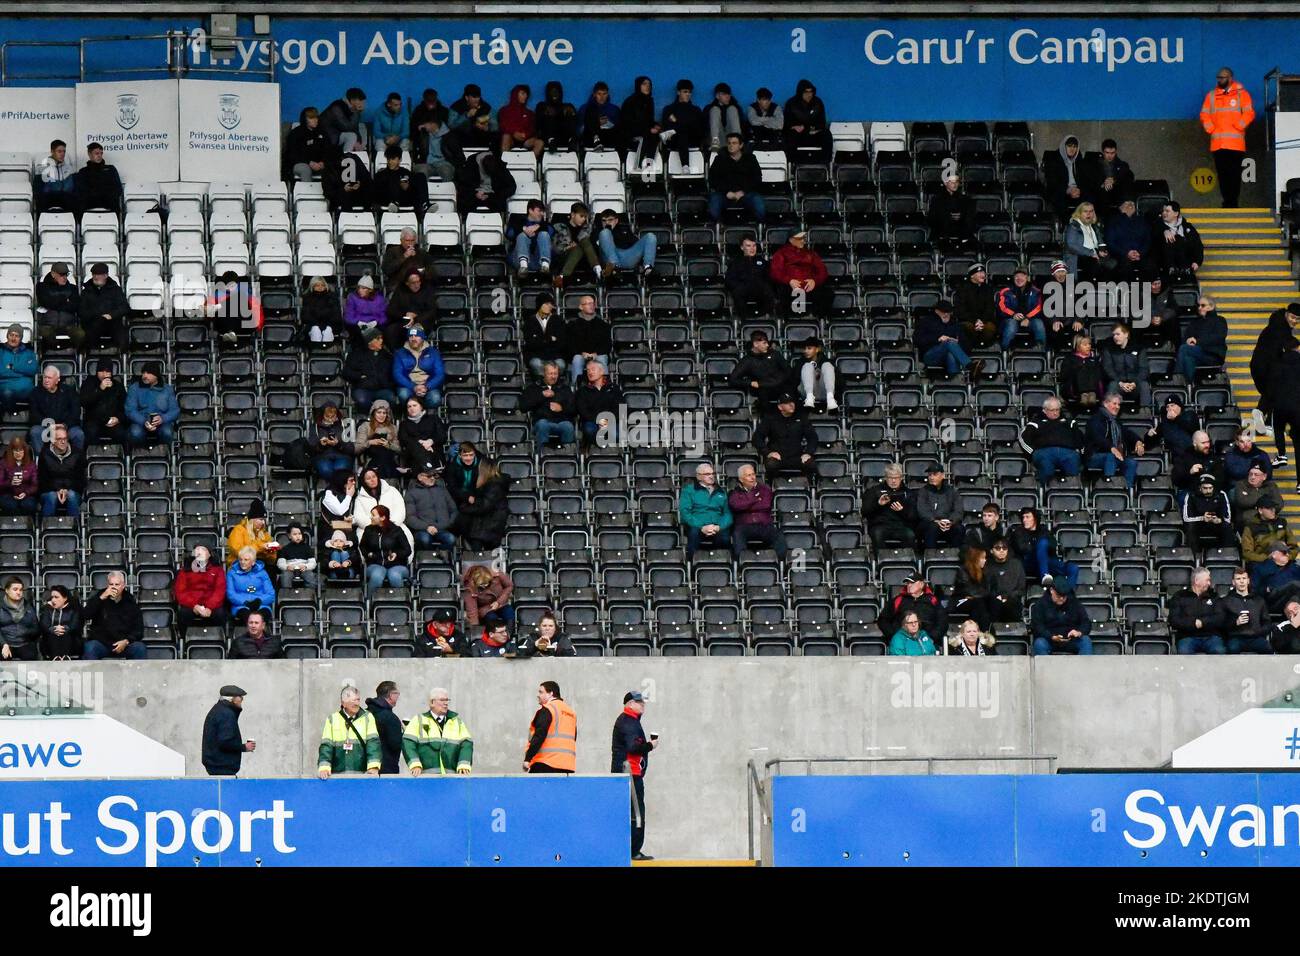 Swansea, Wales. 8 November 2022. The crowd during the Professional Development League game between Swansea City Under 21 and Queens Park Rangers Under 21 at the Swansea.com Stadium in Swansea, Wales, UK on 8 November 2022. Credit: Duncan Thomas/Majestic Media/Alamy Live News. Stock Photo